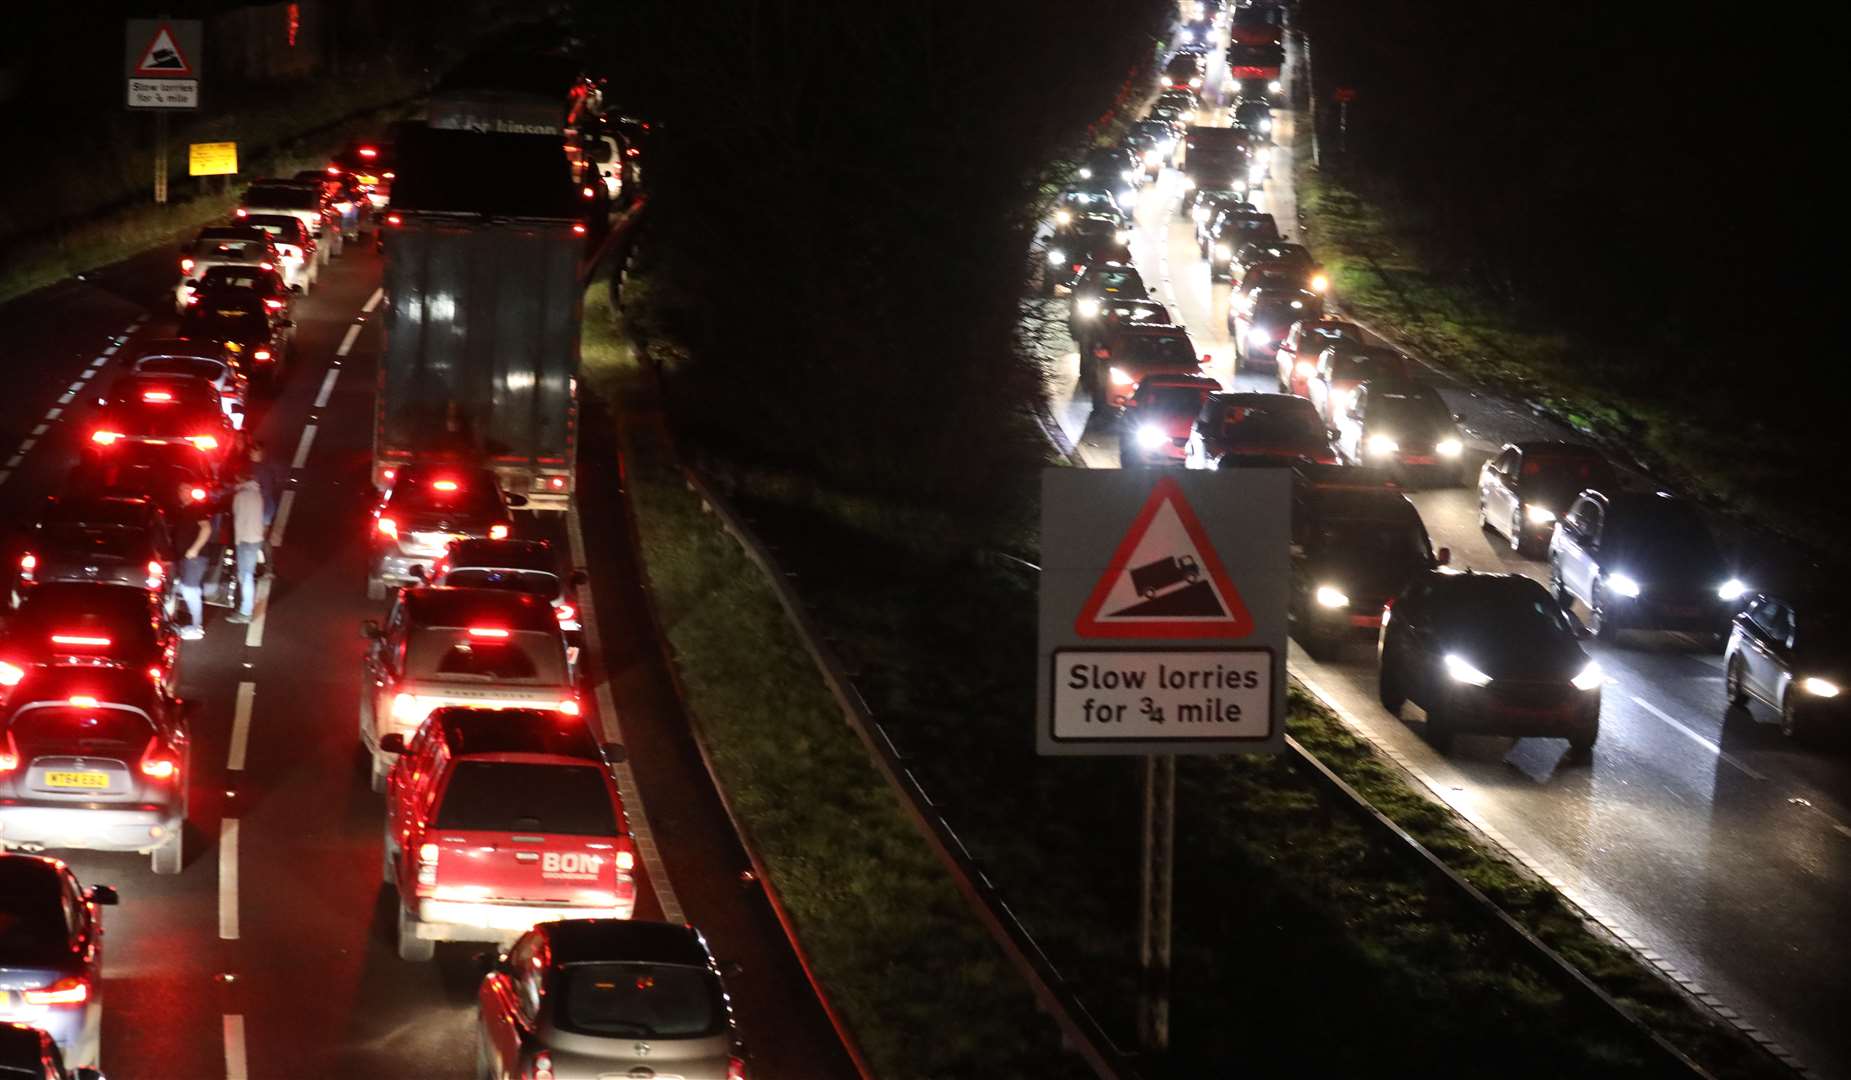 The queues on the approach to Winter Wonderland at Detling Showground in 2020 Pic: UKNIP